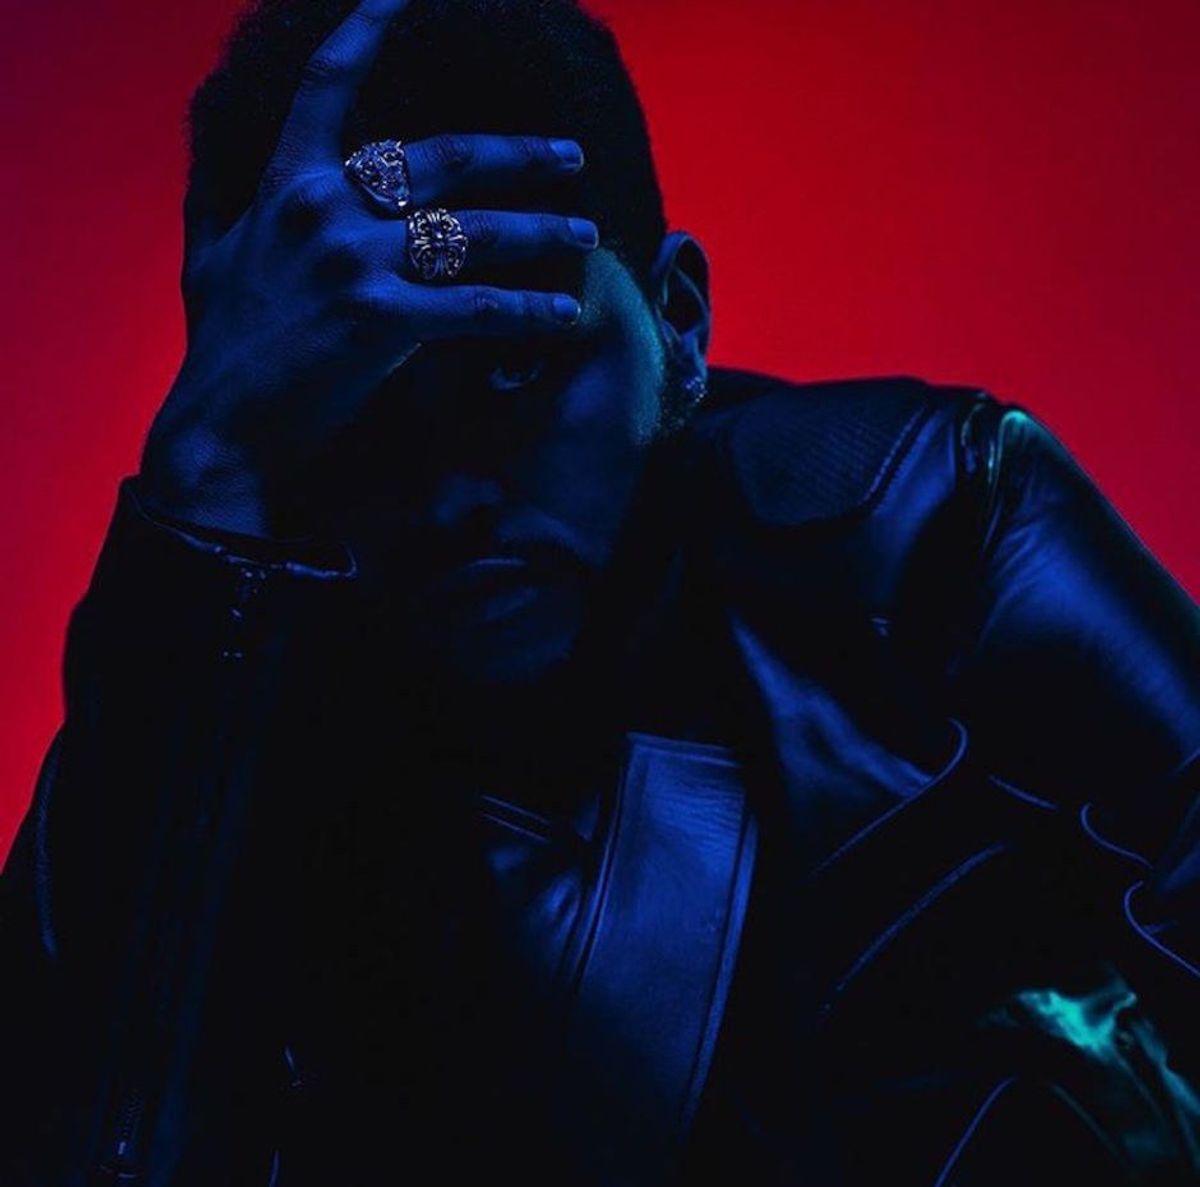 Album Review: The Weeknd's 'Starboy'